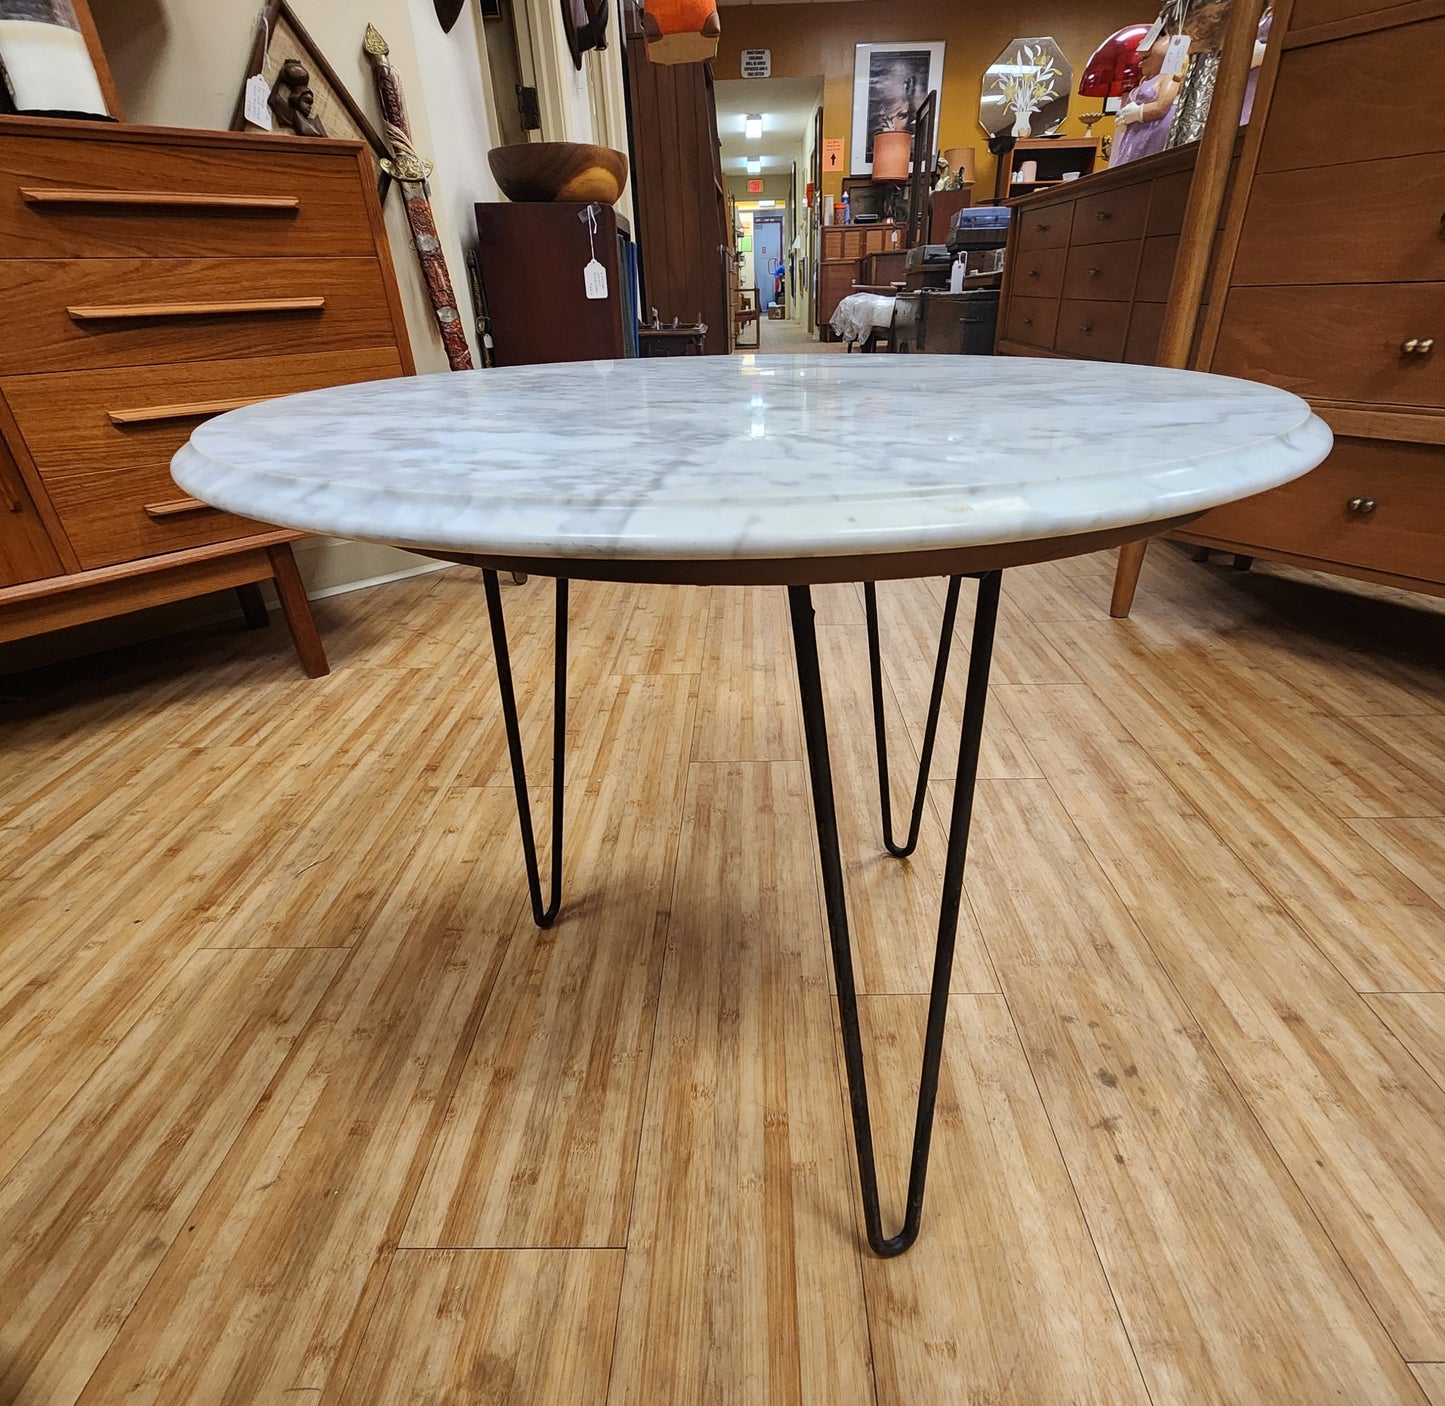 Vitnage Italian Marble Top & Iron Side Table